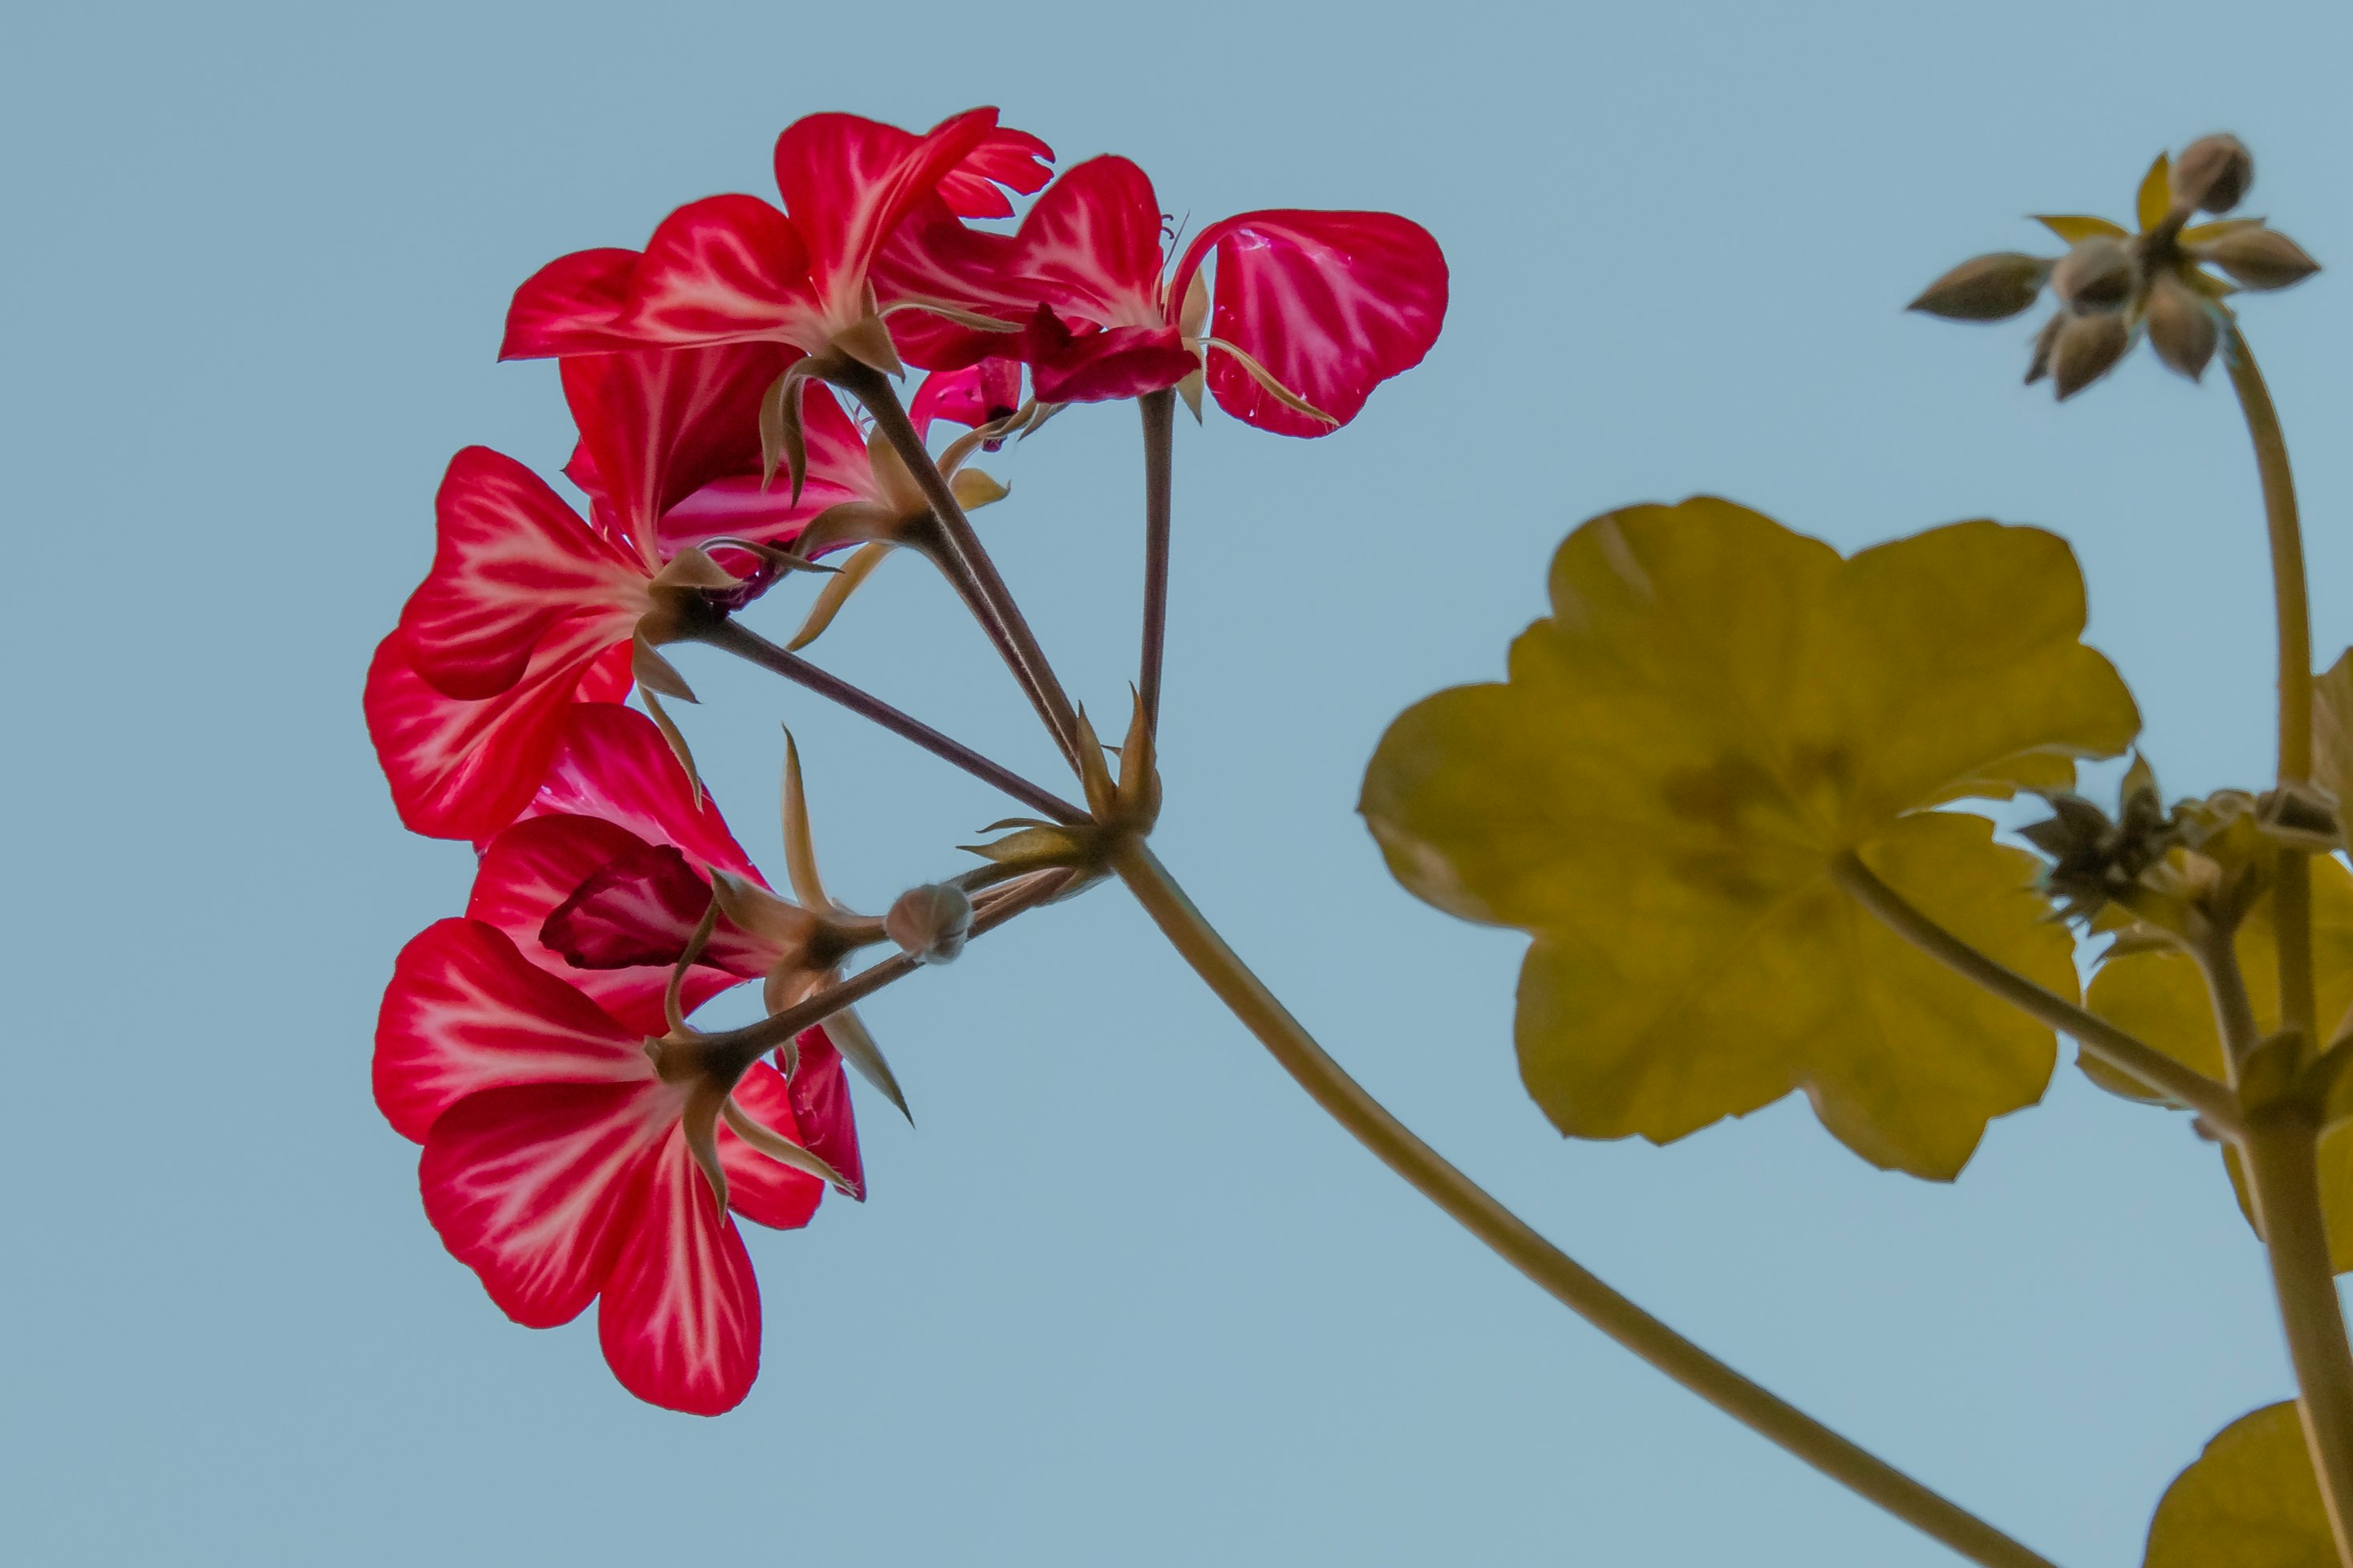 pink and yellow flowers under blue sky during daytime